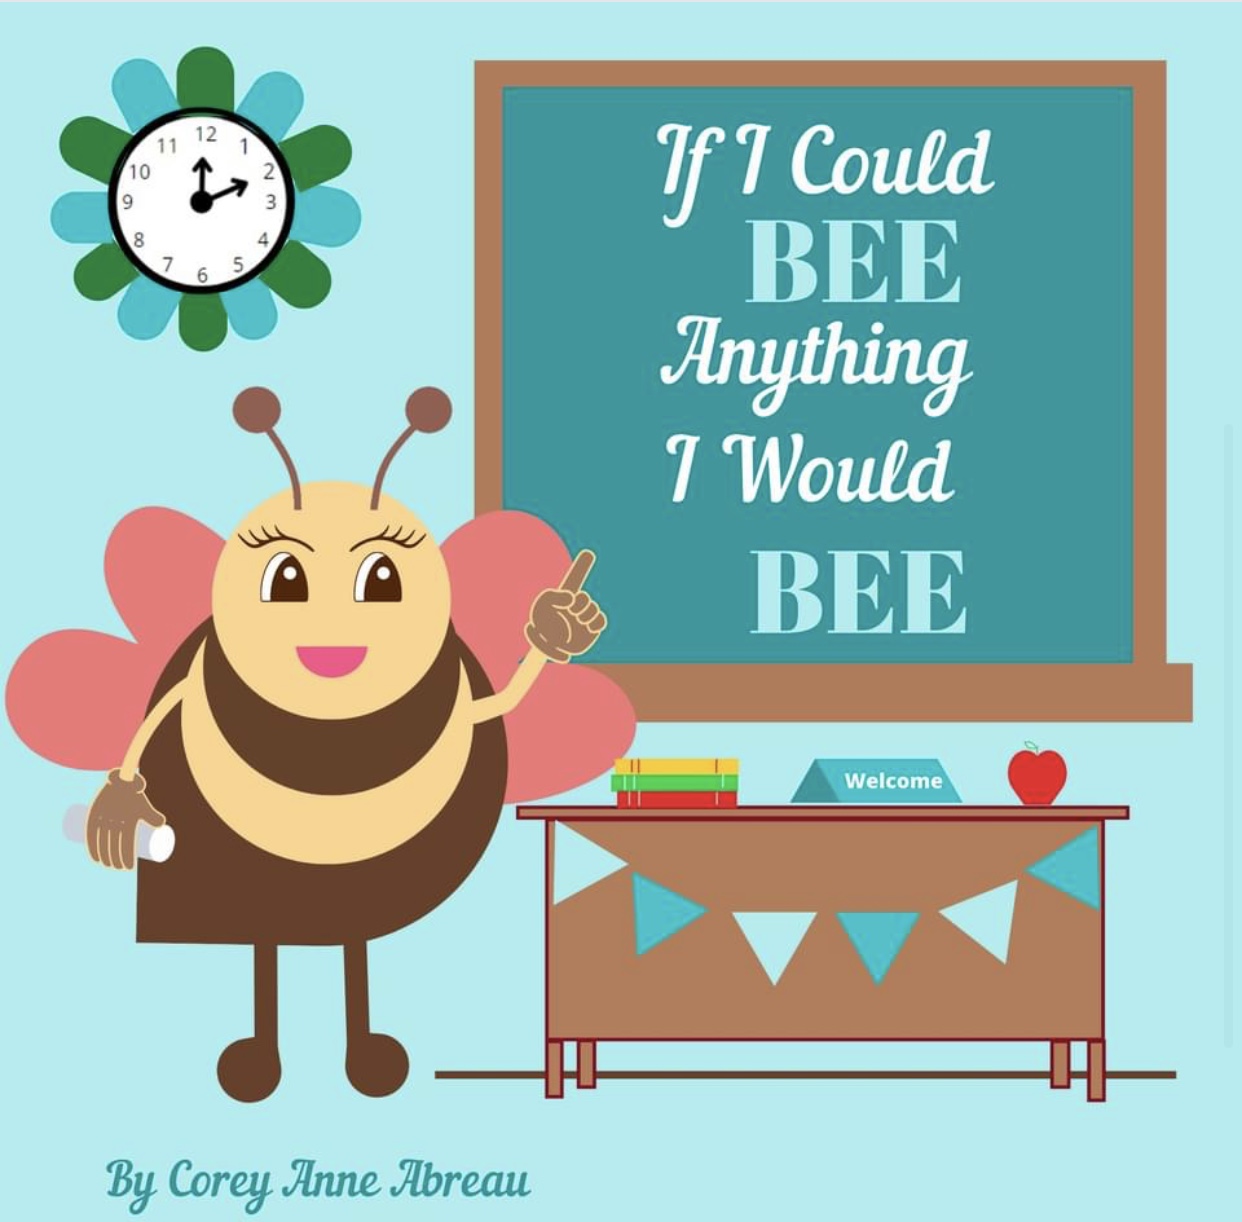 If I could bee anything I would bee - check out our free ebook if you have kindle